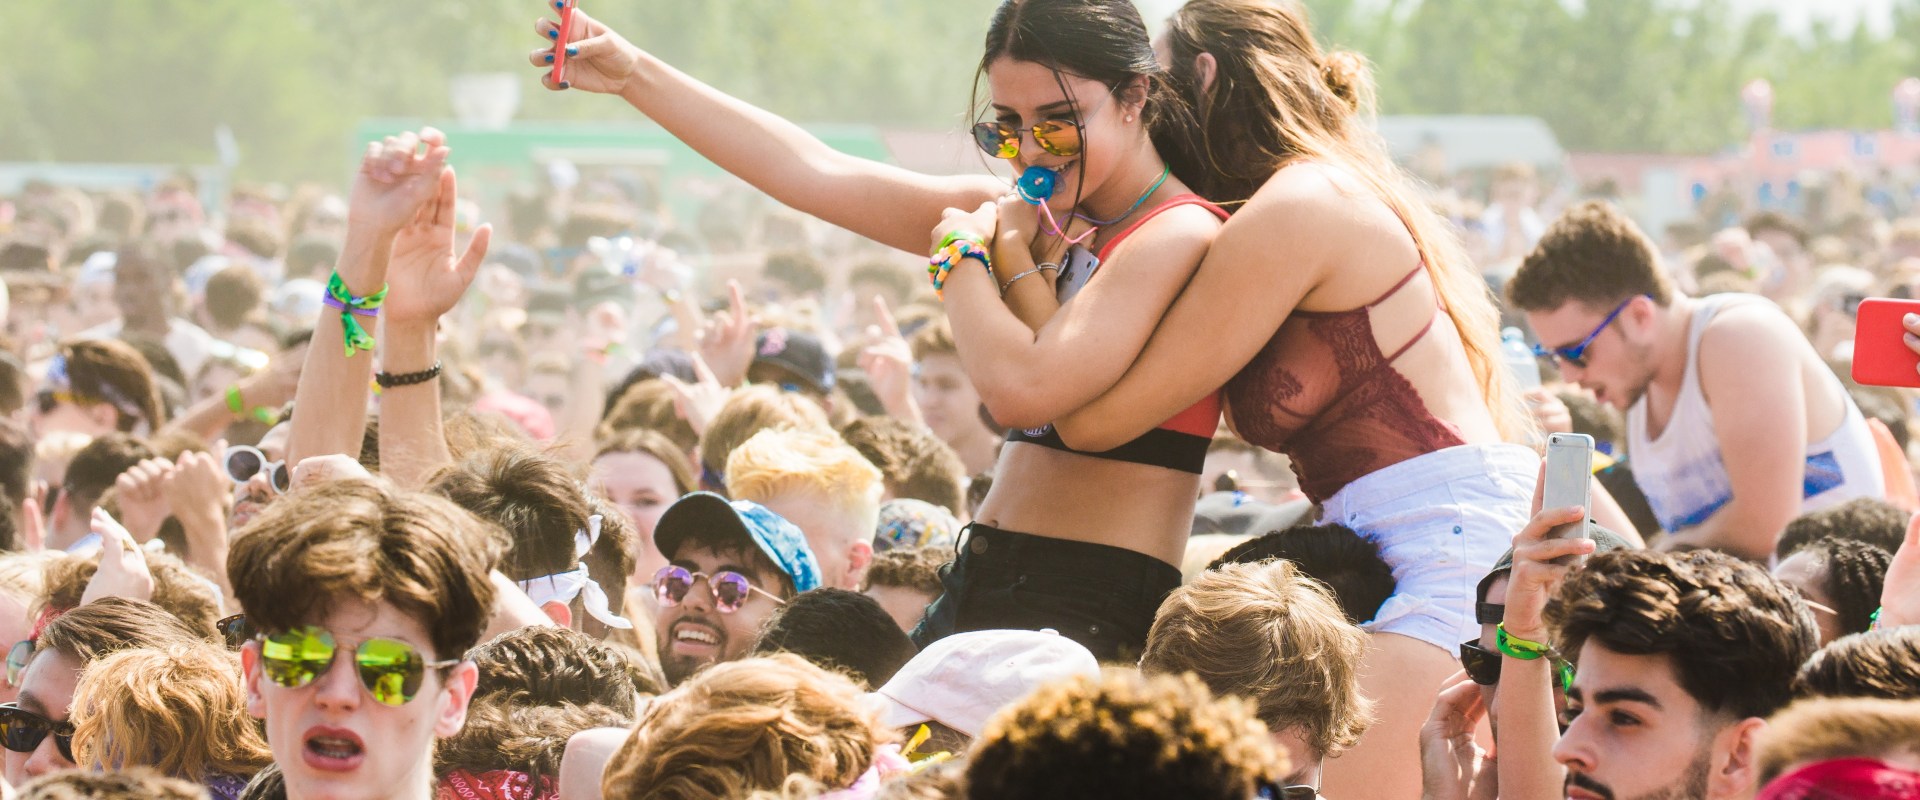 How do you get the best time at a music festival?